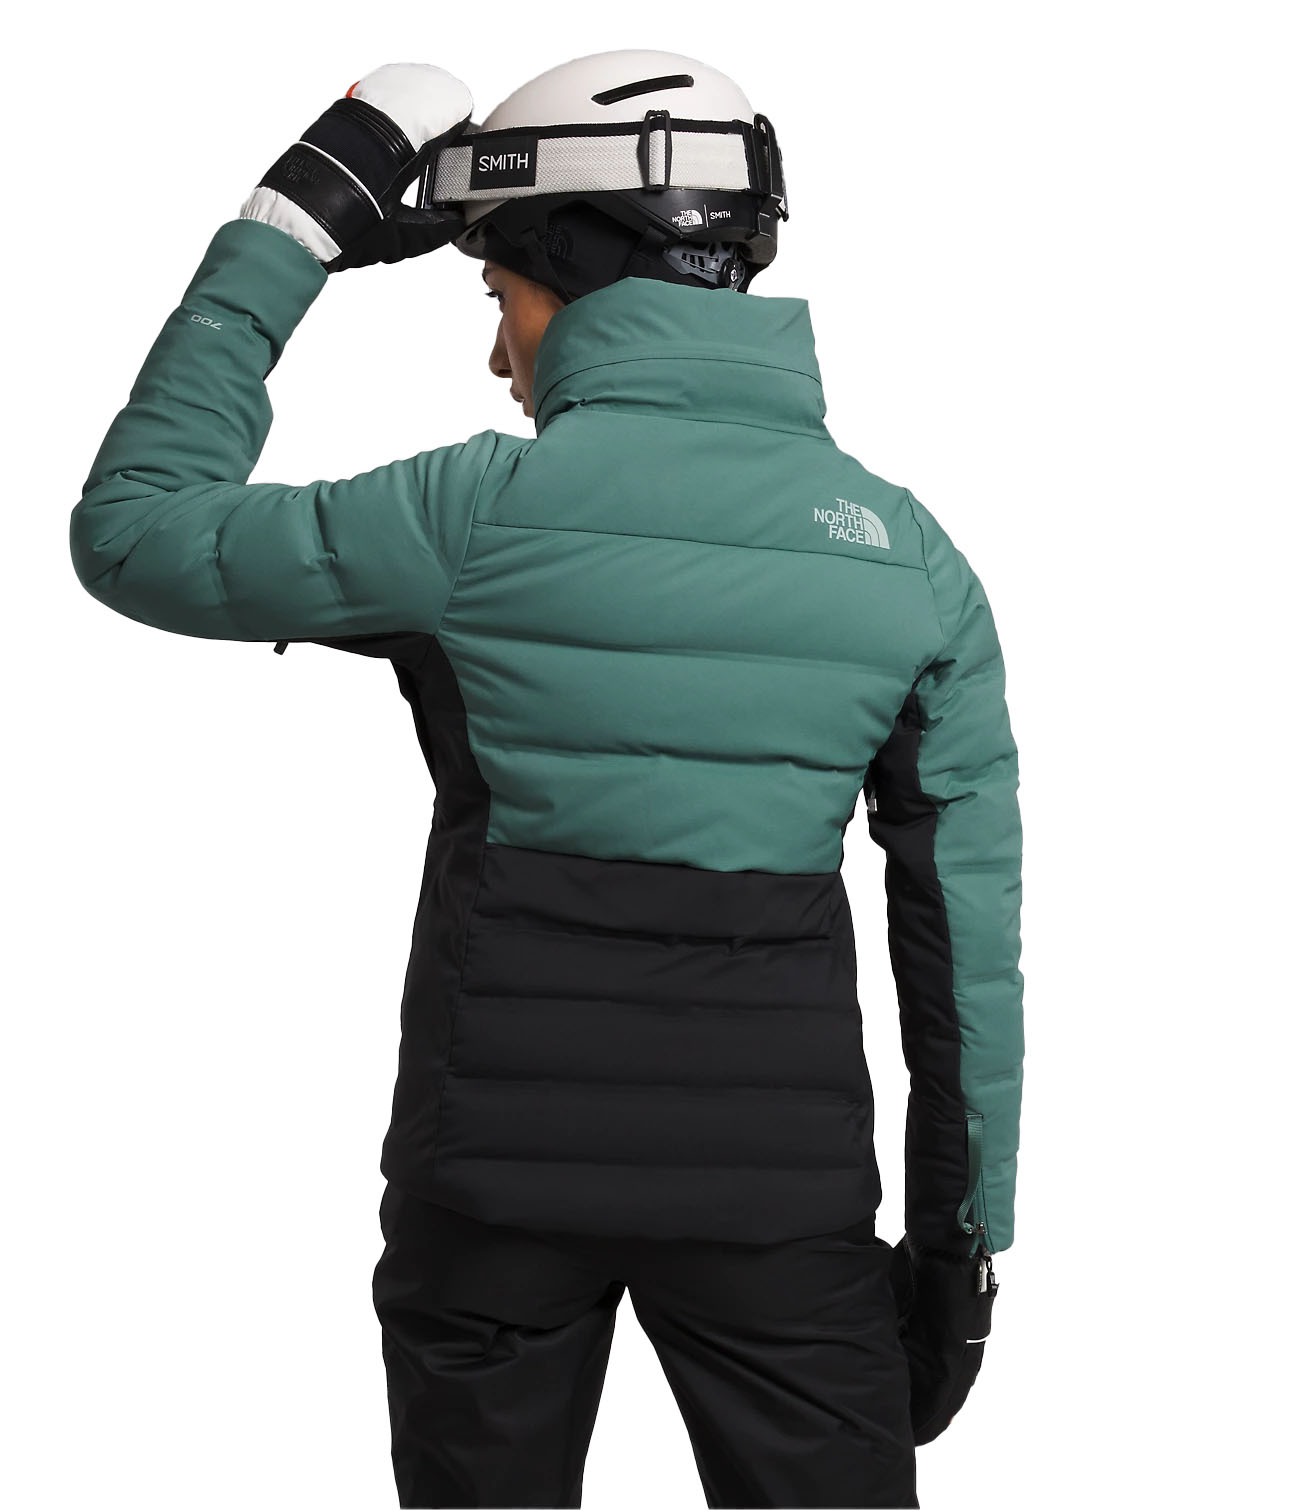 The North Face Womens AMRY DOWN JACKET DARK SAGE - Paragon Sports